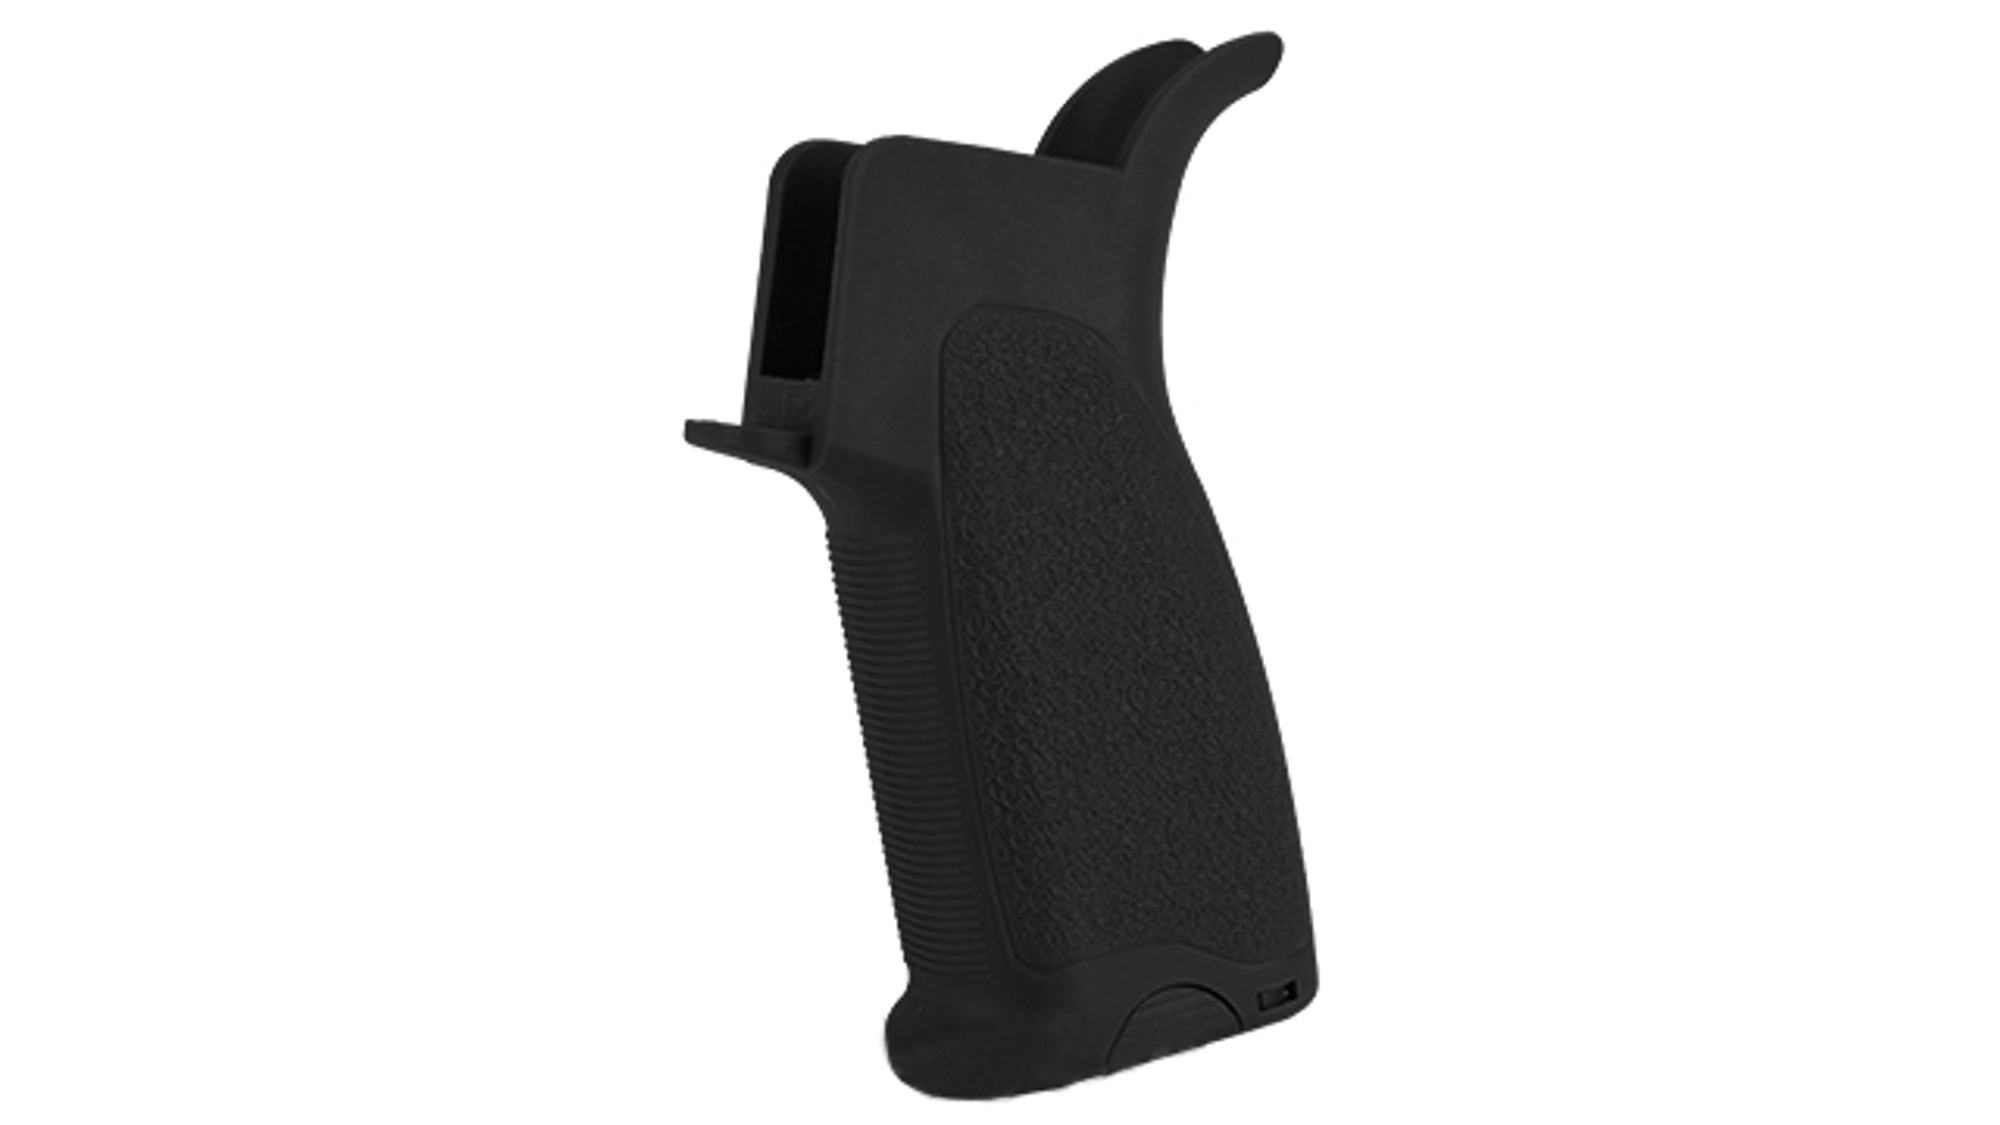 ZCI / Cyma Ergonomic Combat Motor Grip Type A for M4/M16 Airsoft AEGs (Color: Black)